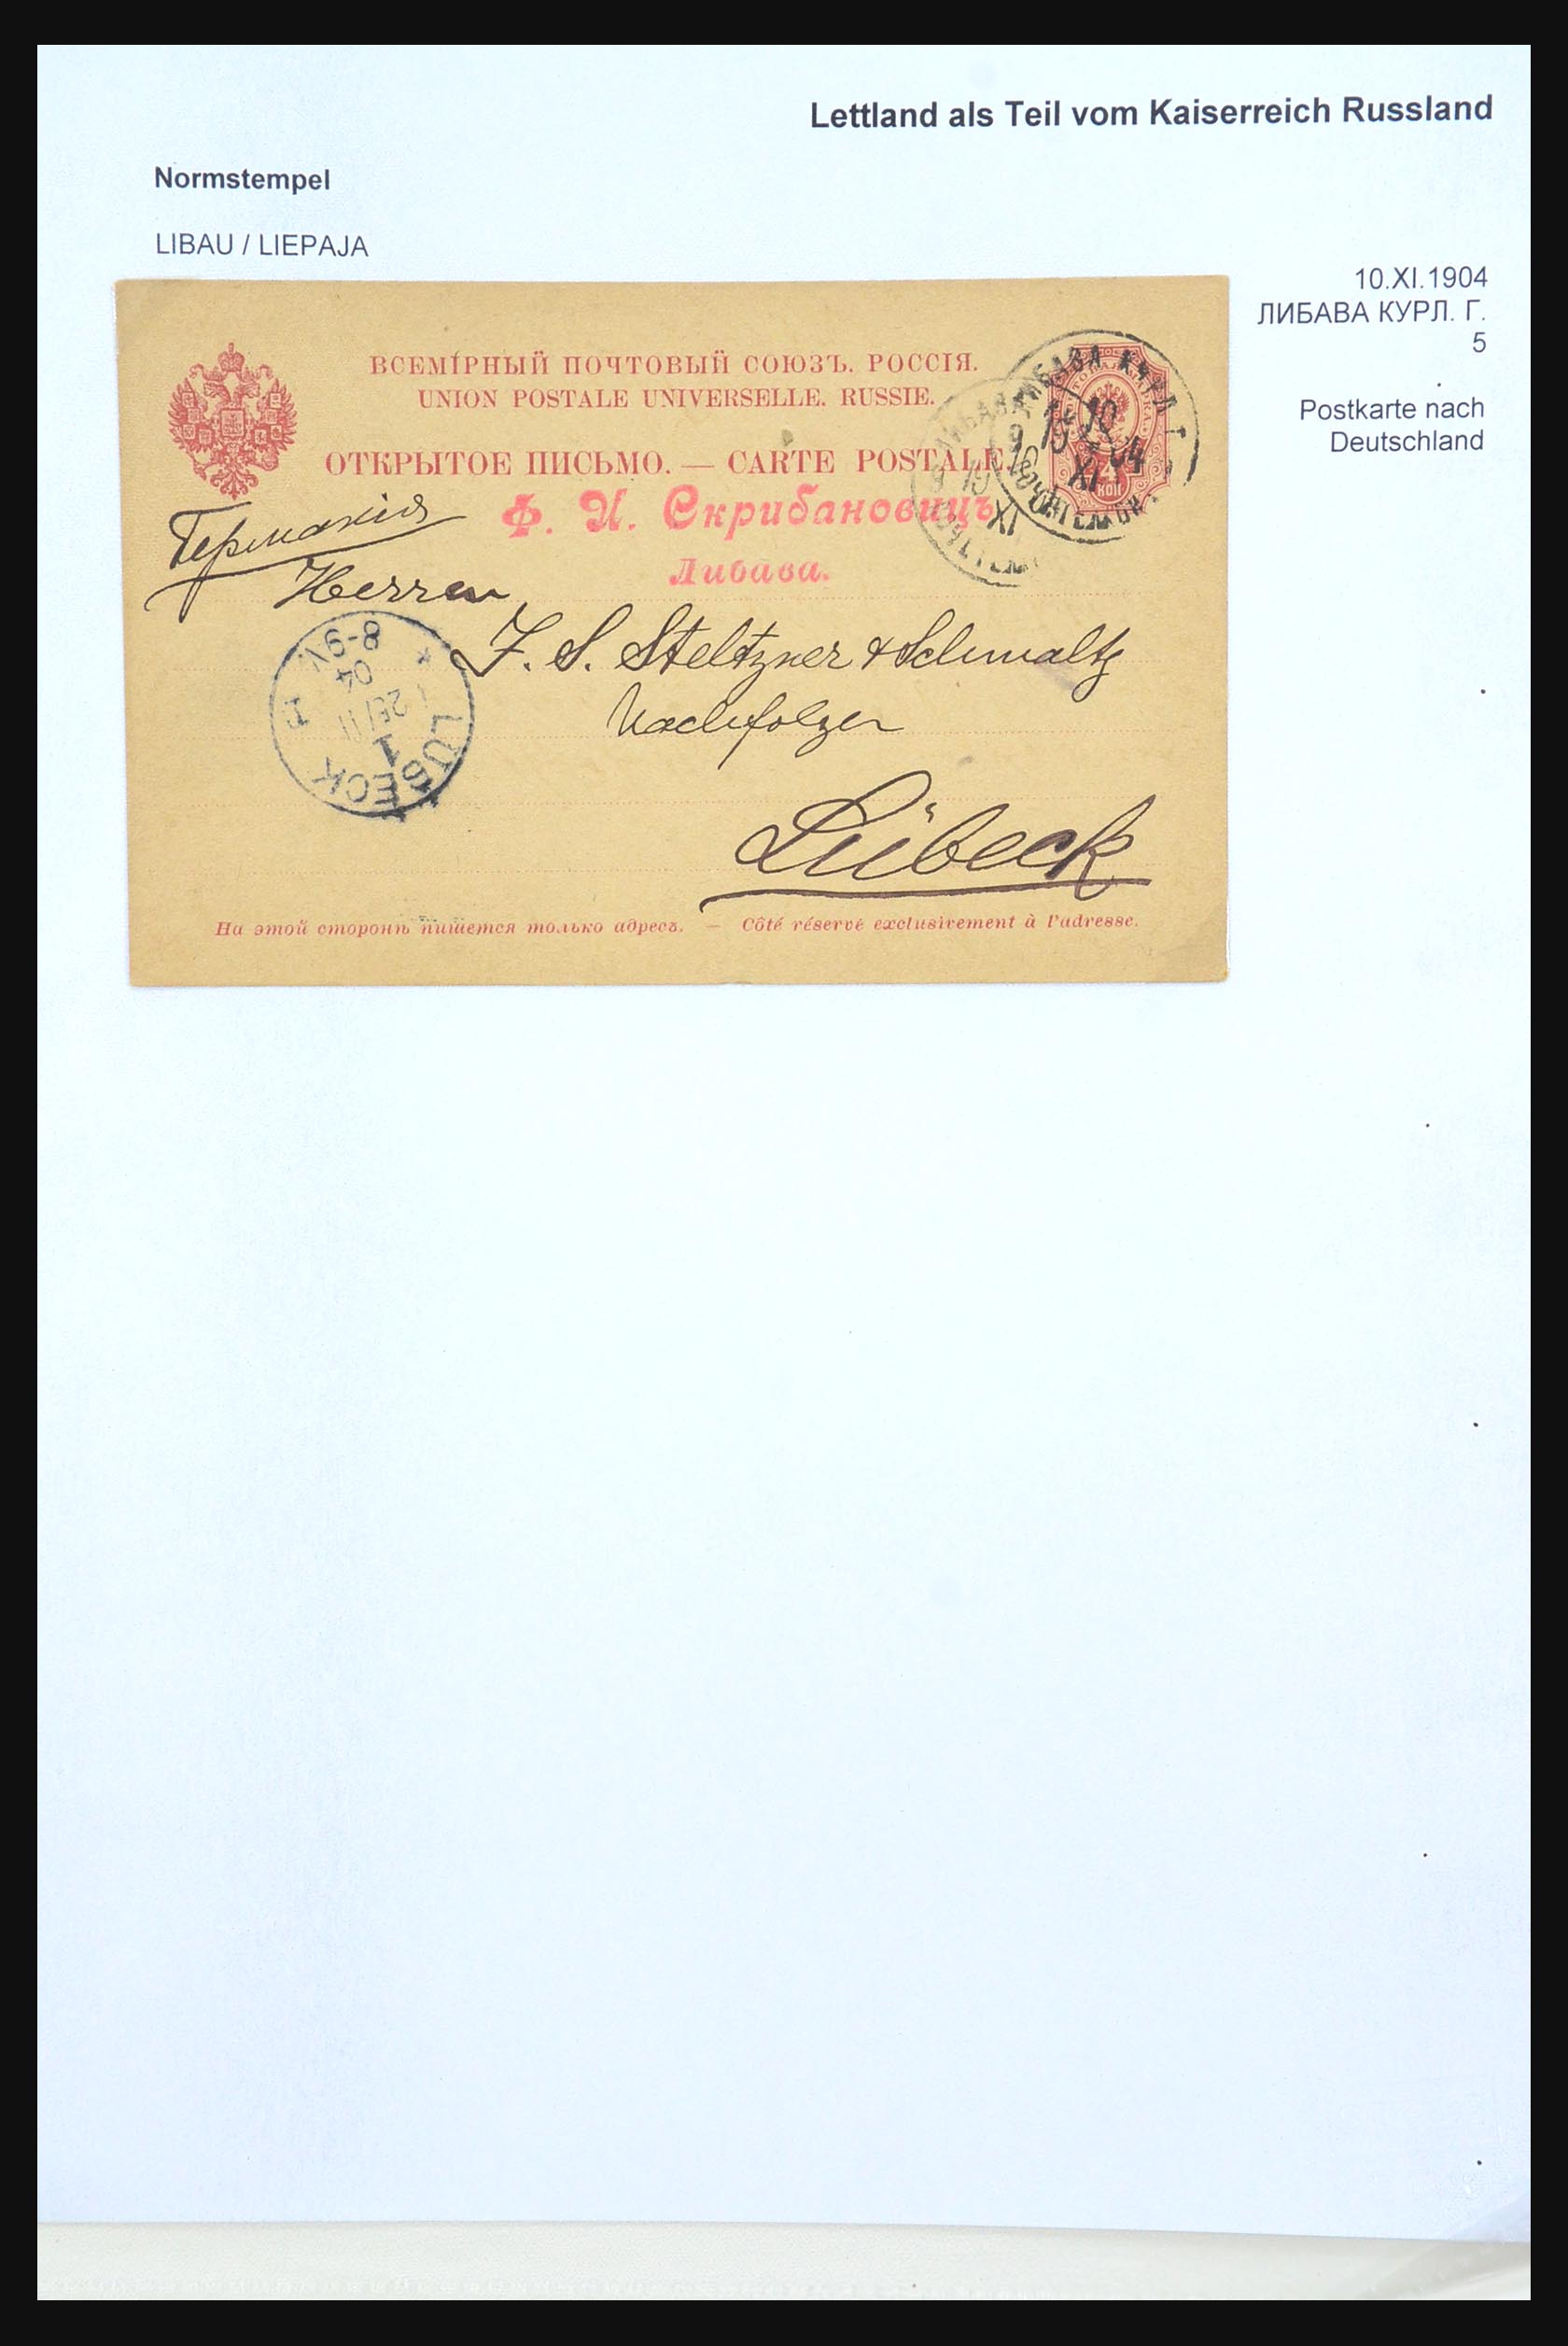 31305 141 - 31305 Latvia as part of Russia 1817-1918.